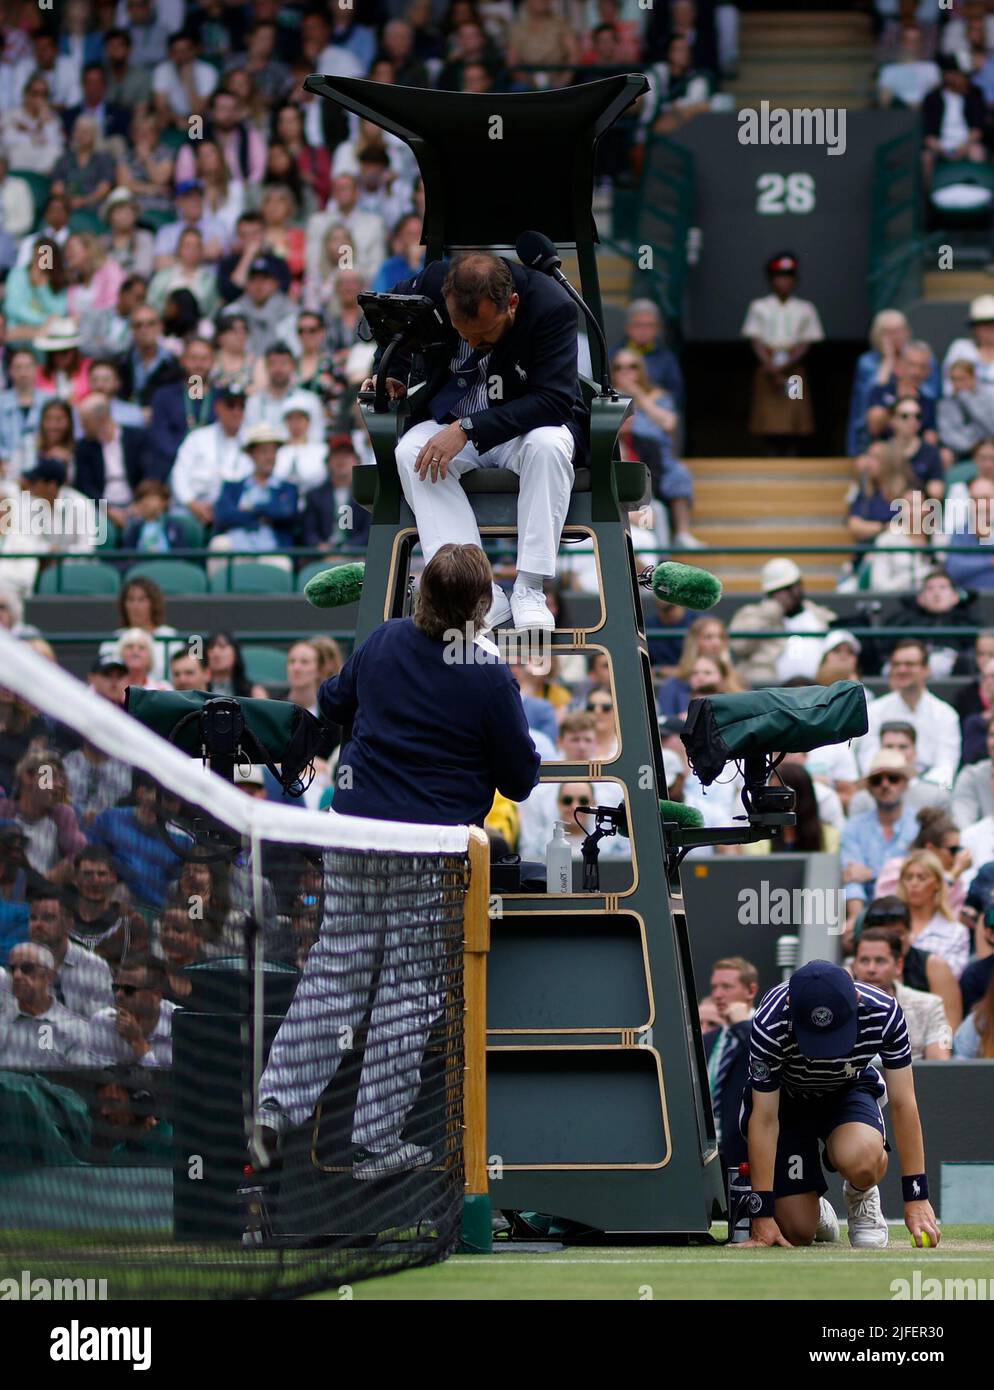 A line judge speaks to the umpire during the Men's Singles third round match between Stefanos Tsitsipas and Nick Kyrgios during day six of the 2022 Wimbledon Championships at the All England Lawn Tennis and Croquet Club, Wimbledon. Picture date: Saturday July 2, 2022. Stock Photo